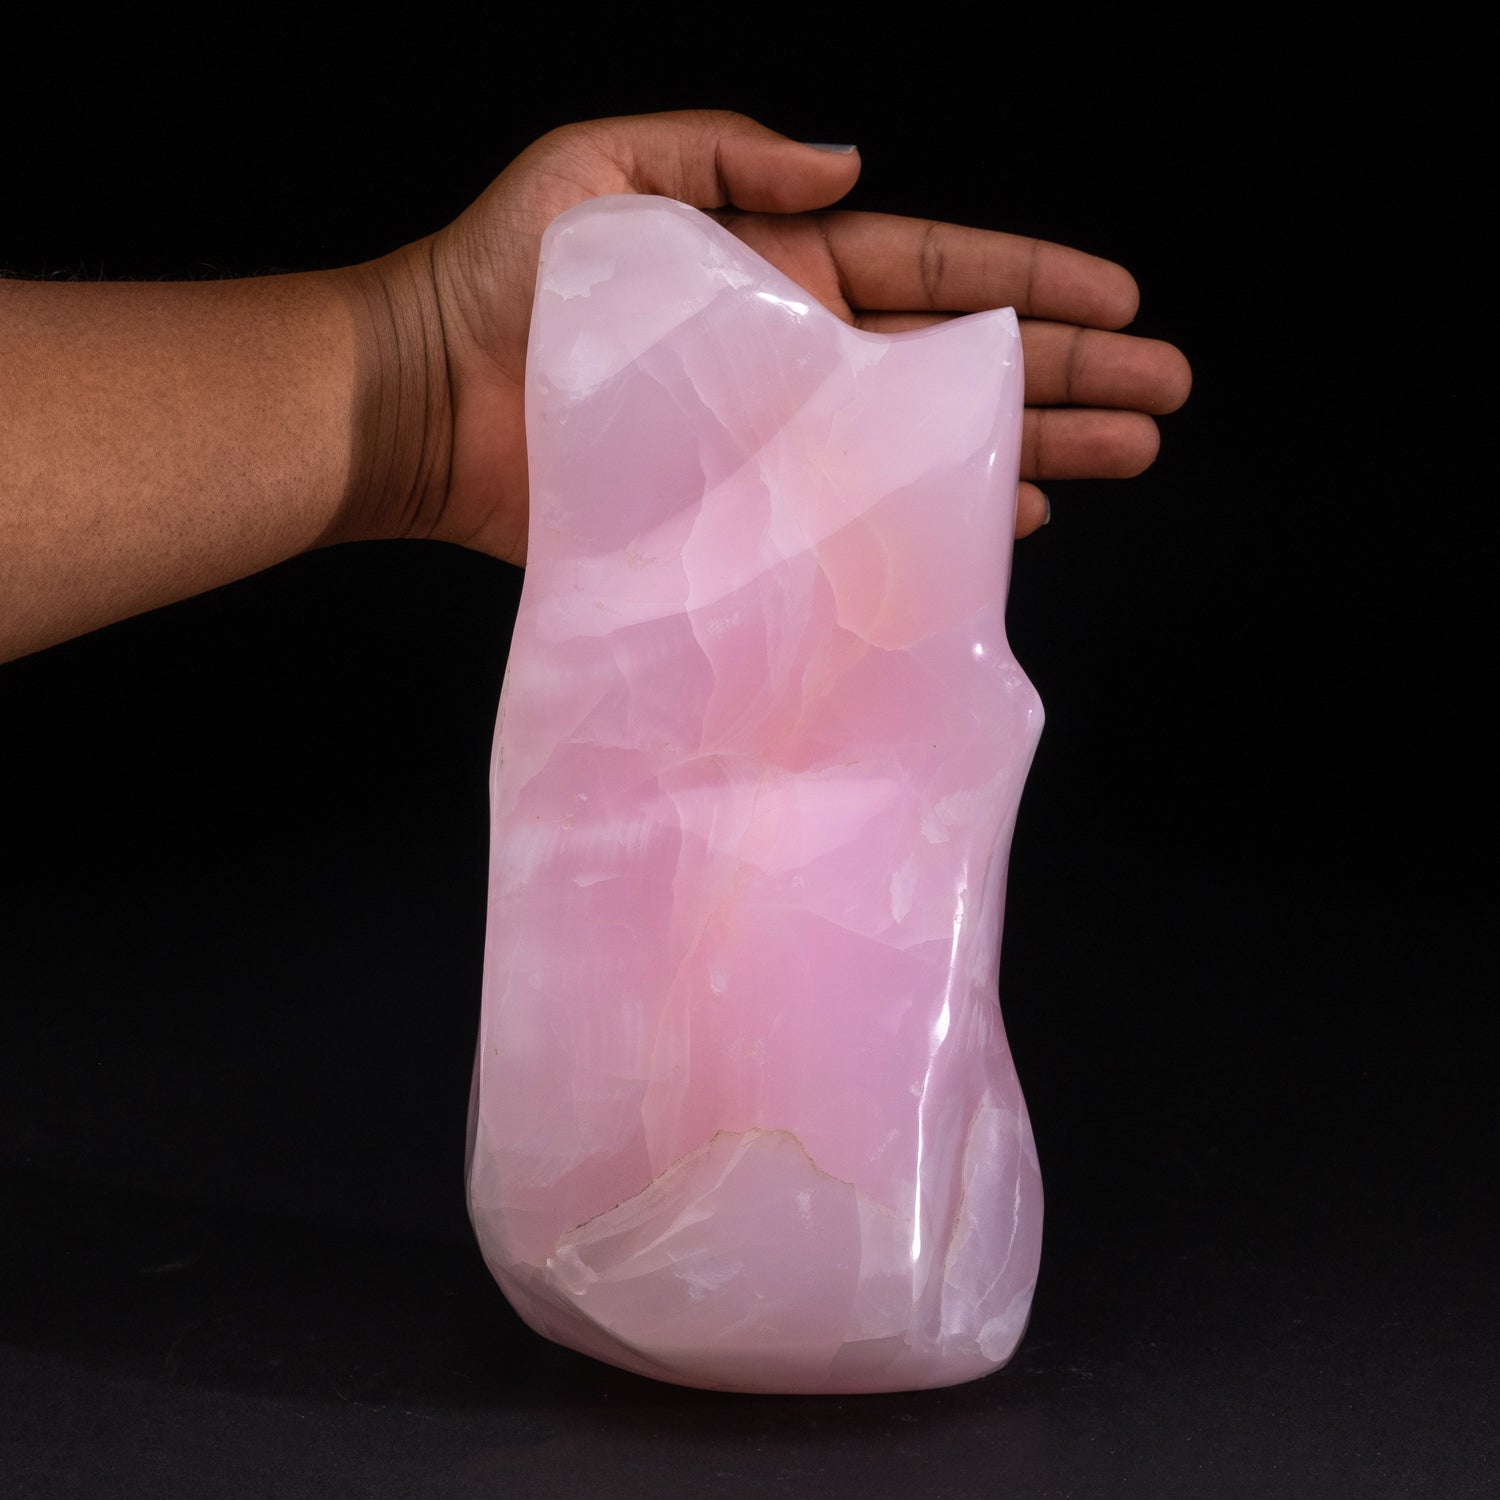 Polished Pink Mangano Calcite from Pakistan (9.4 lbs)